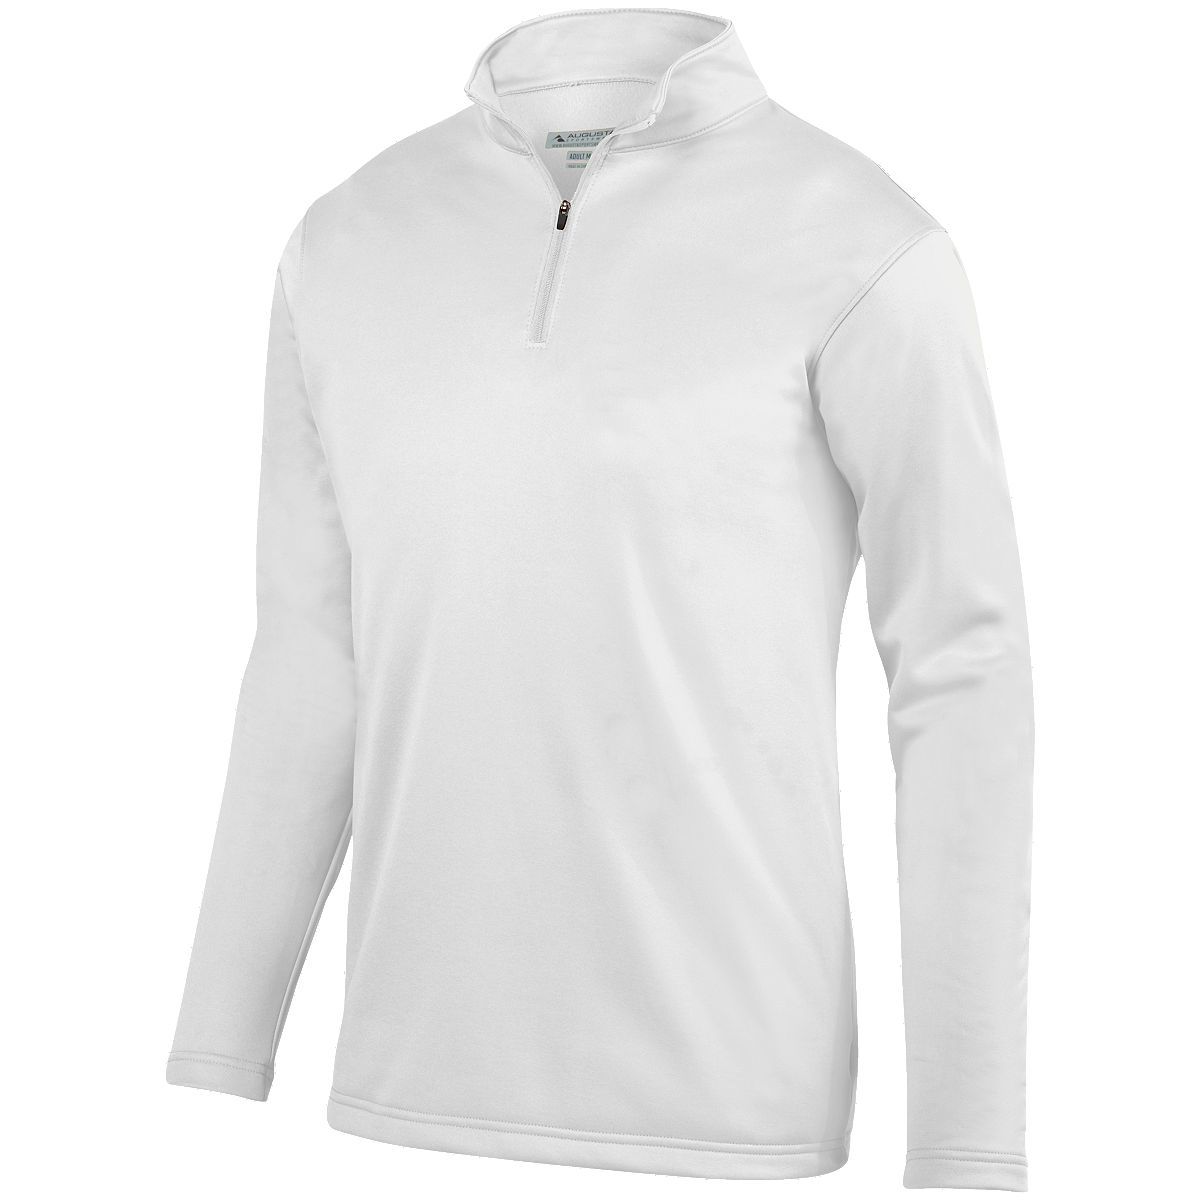 Augusta Sportswear Youth Wicking Fleece Pullover in White  -Part of the Youth, Youth-Pullover, Augusta-Products, Outerwear product lines at KanaleyCreations.com